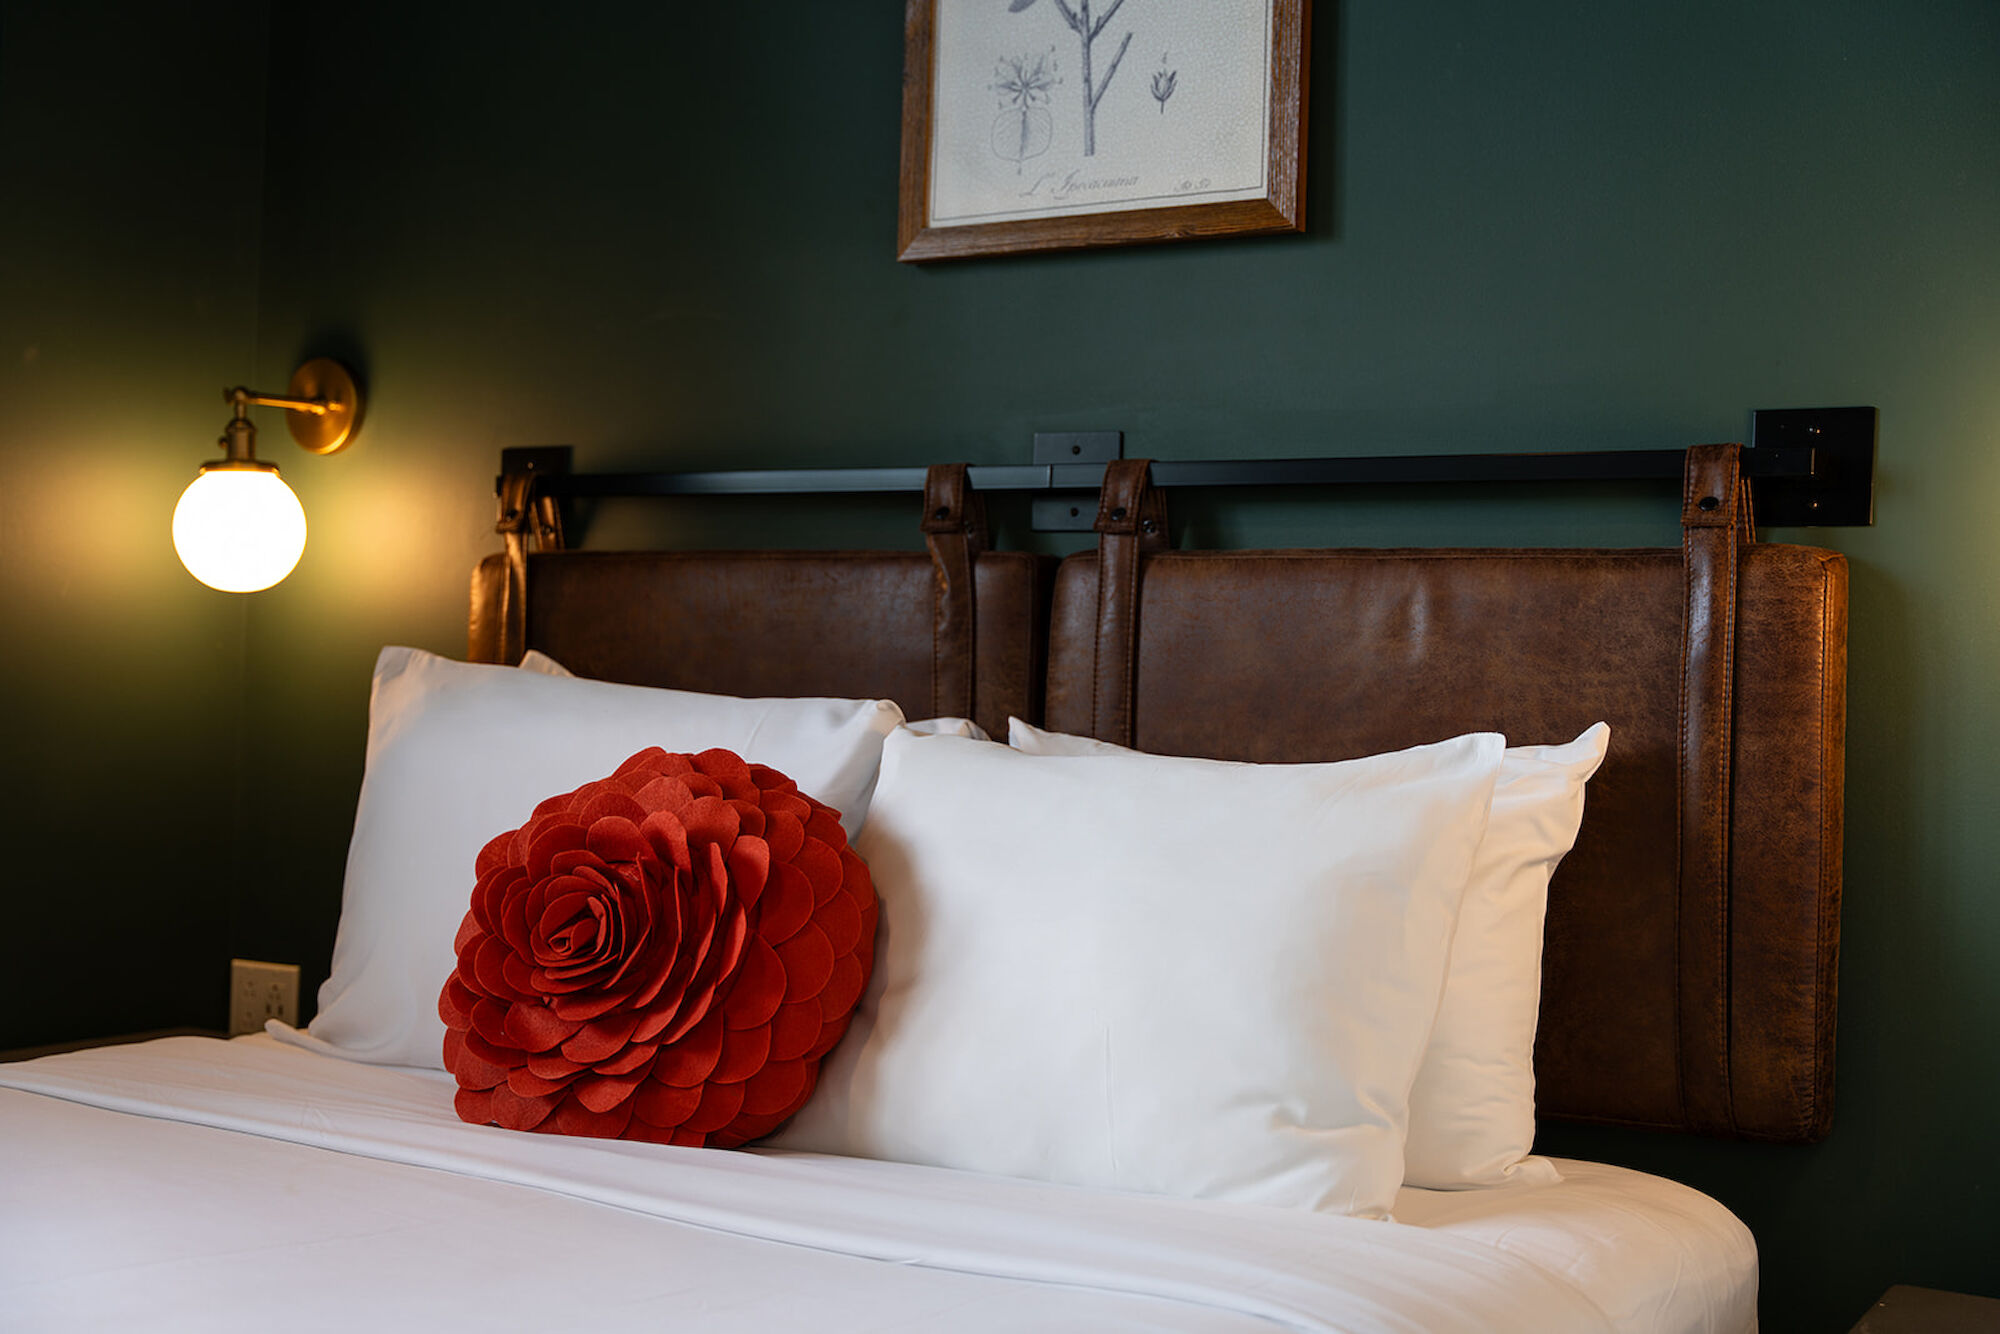 A cozy bedroom setup featuring a bed with white linens, a large red flower-shaped pillow, a leather headboard, and wall-mounted lights.